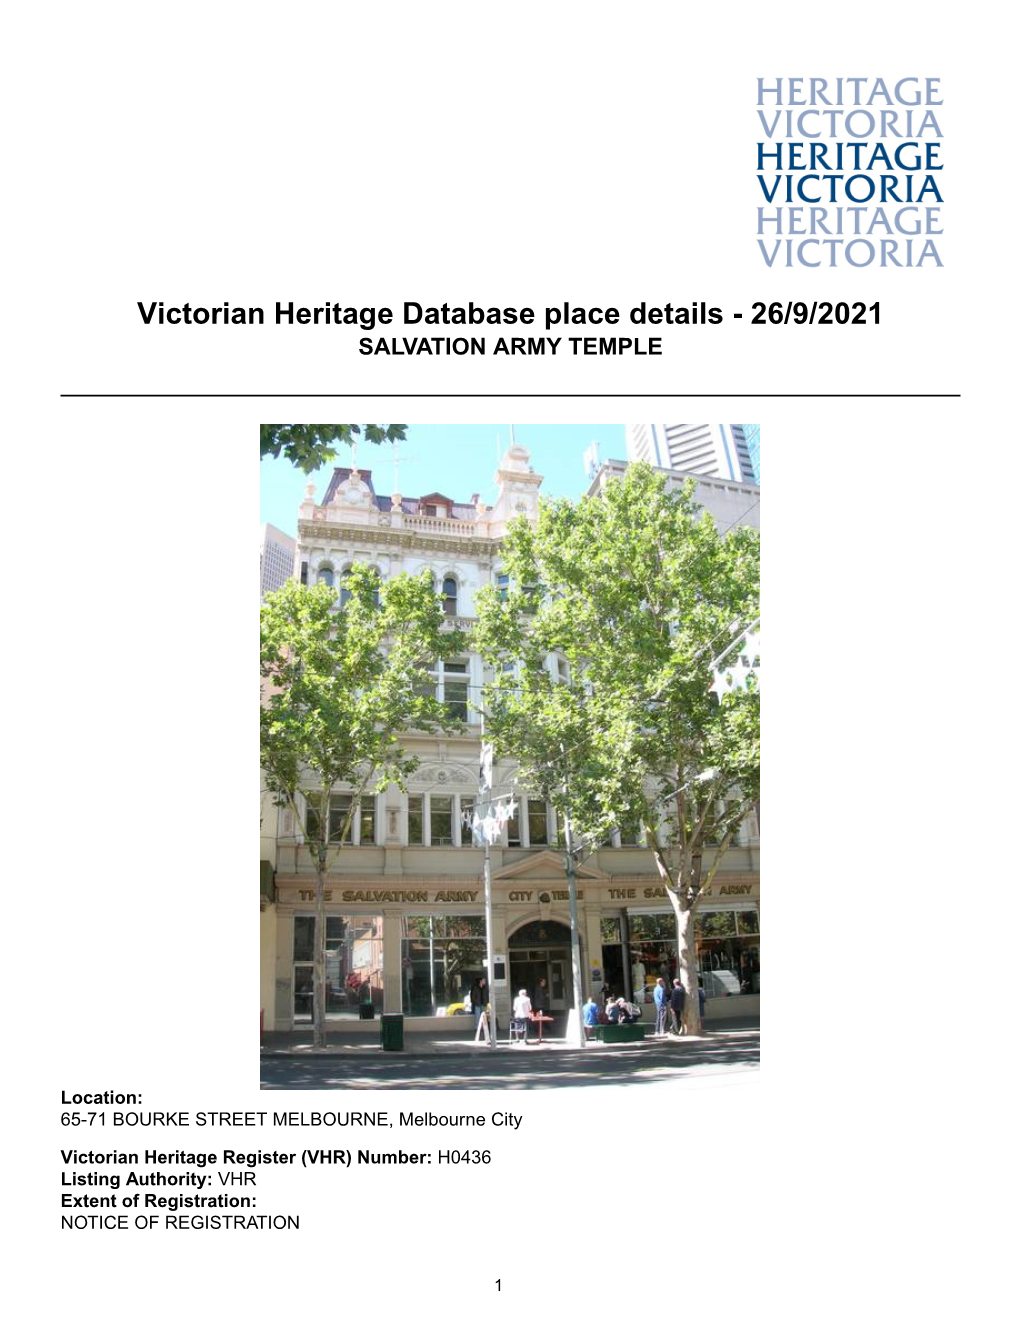 Victorian Heritage Database Place Details - 26/9/2021 SALVATION ARMY TEMPLE